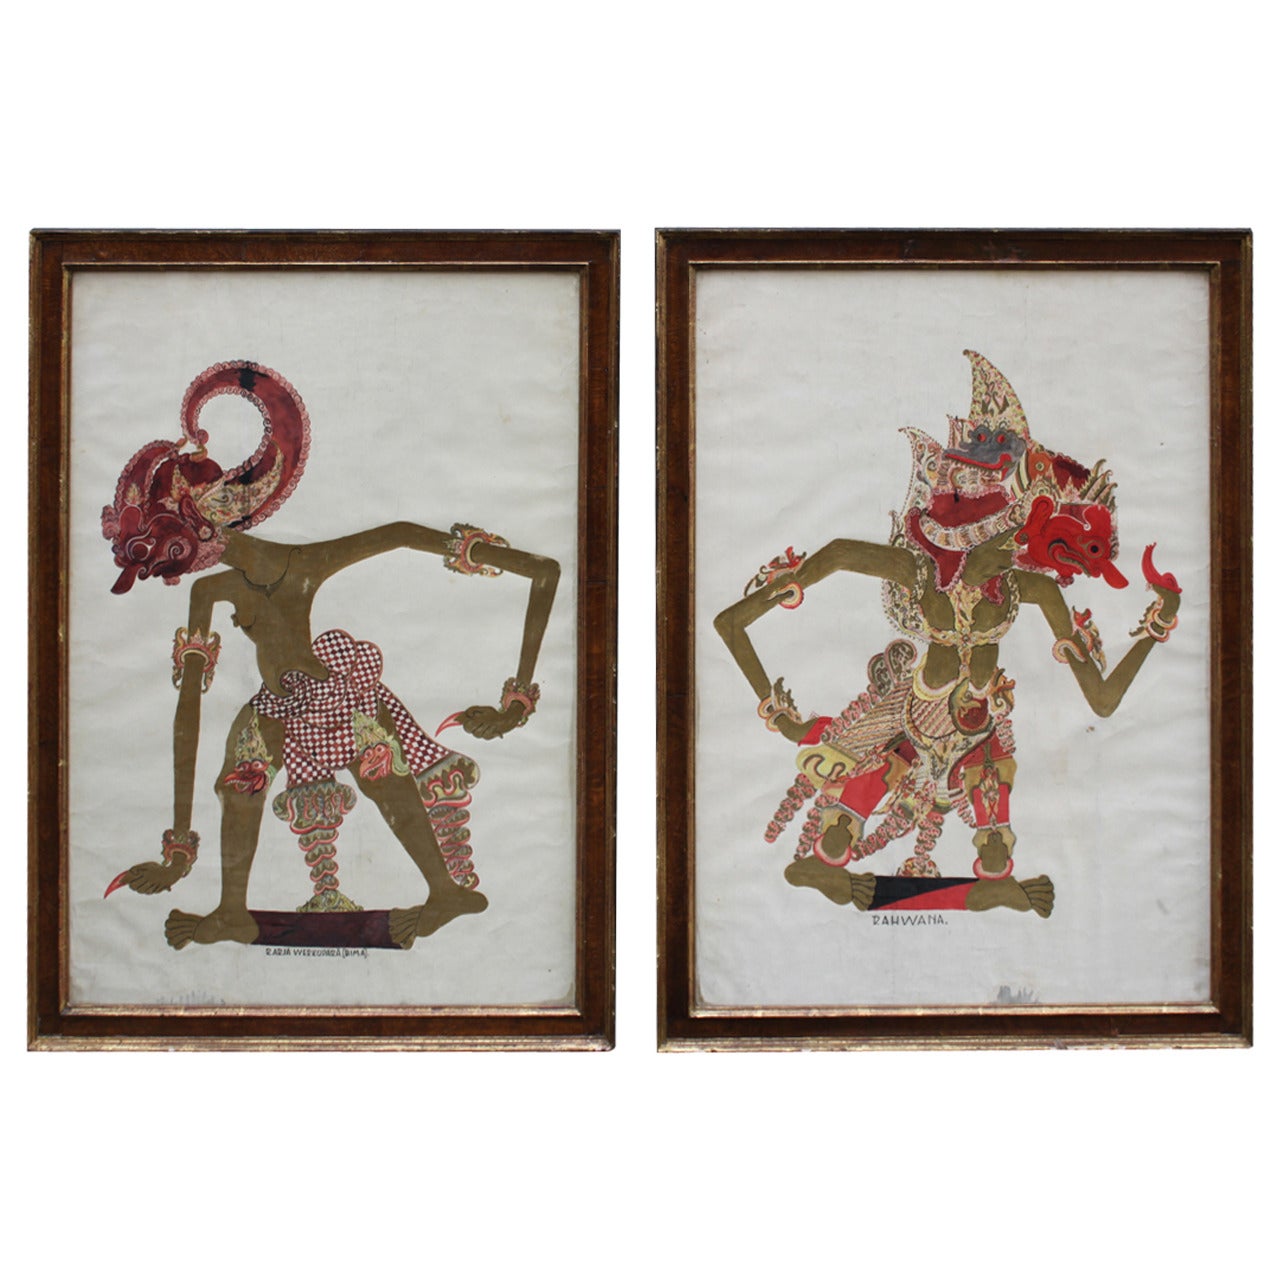 Early 20th Century Pair of Indonesian Paintings in Vintage Burl Wood Frames For Sale